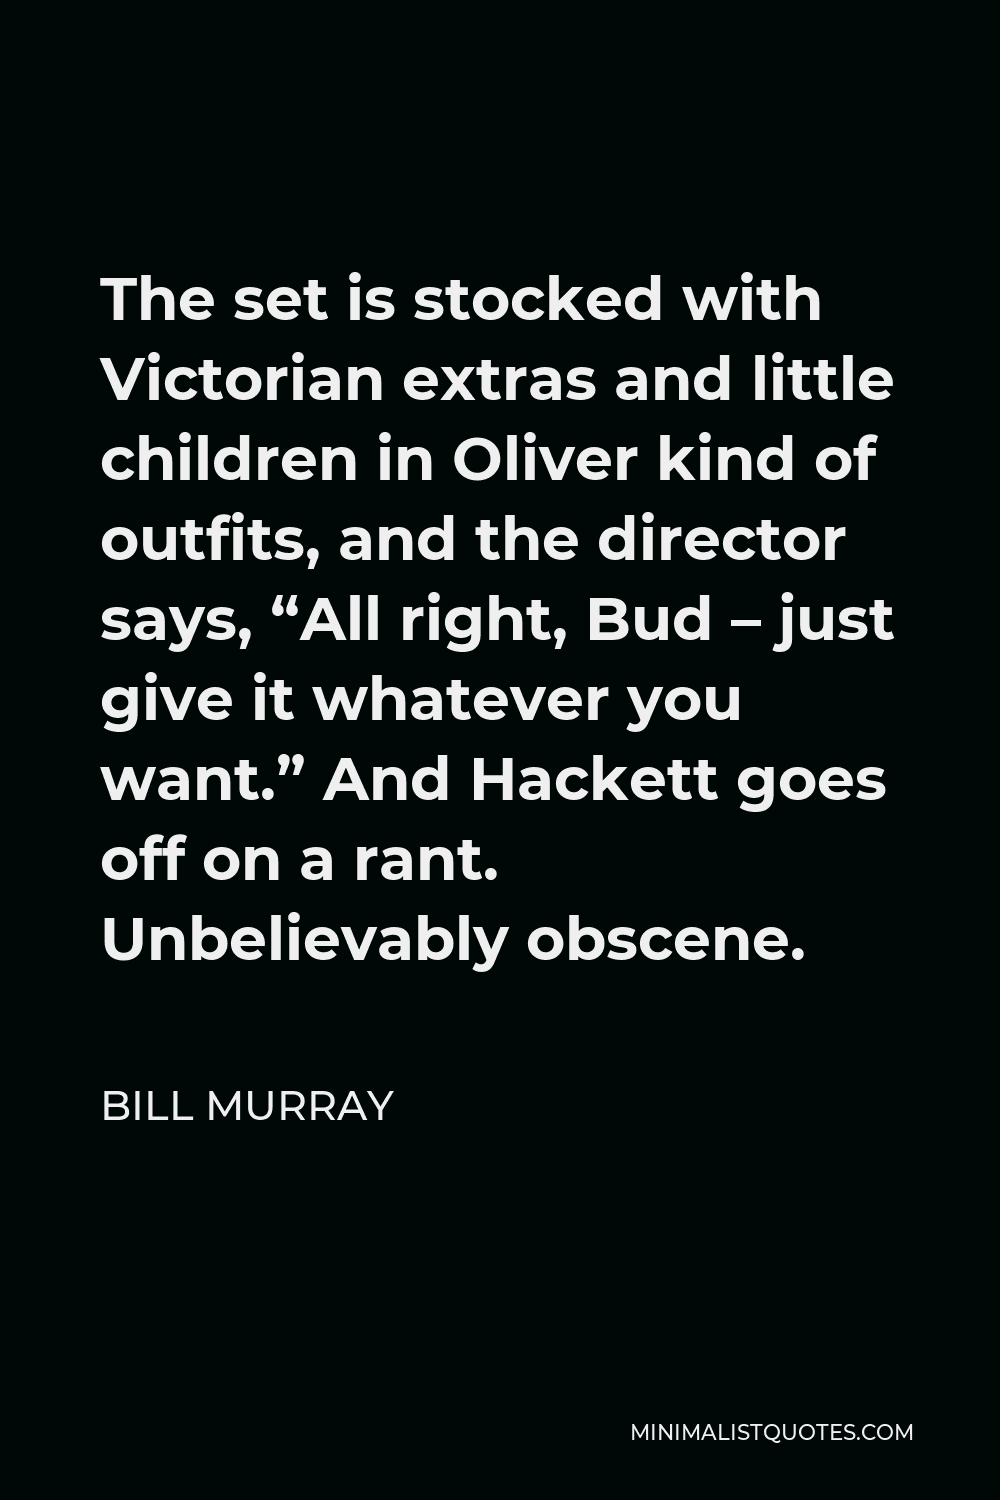 Bill Murray Quote - The set is stocked with Victorian extras and little children in Oliver kind of outfits, and the director says, “All right, Bud – just give it whatever you want.” And Hackett goes off on a rant. Unbelievably obscene.